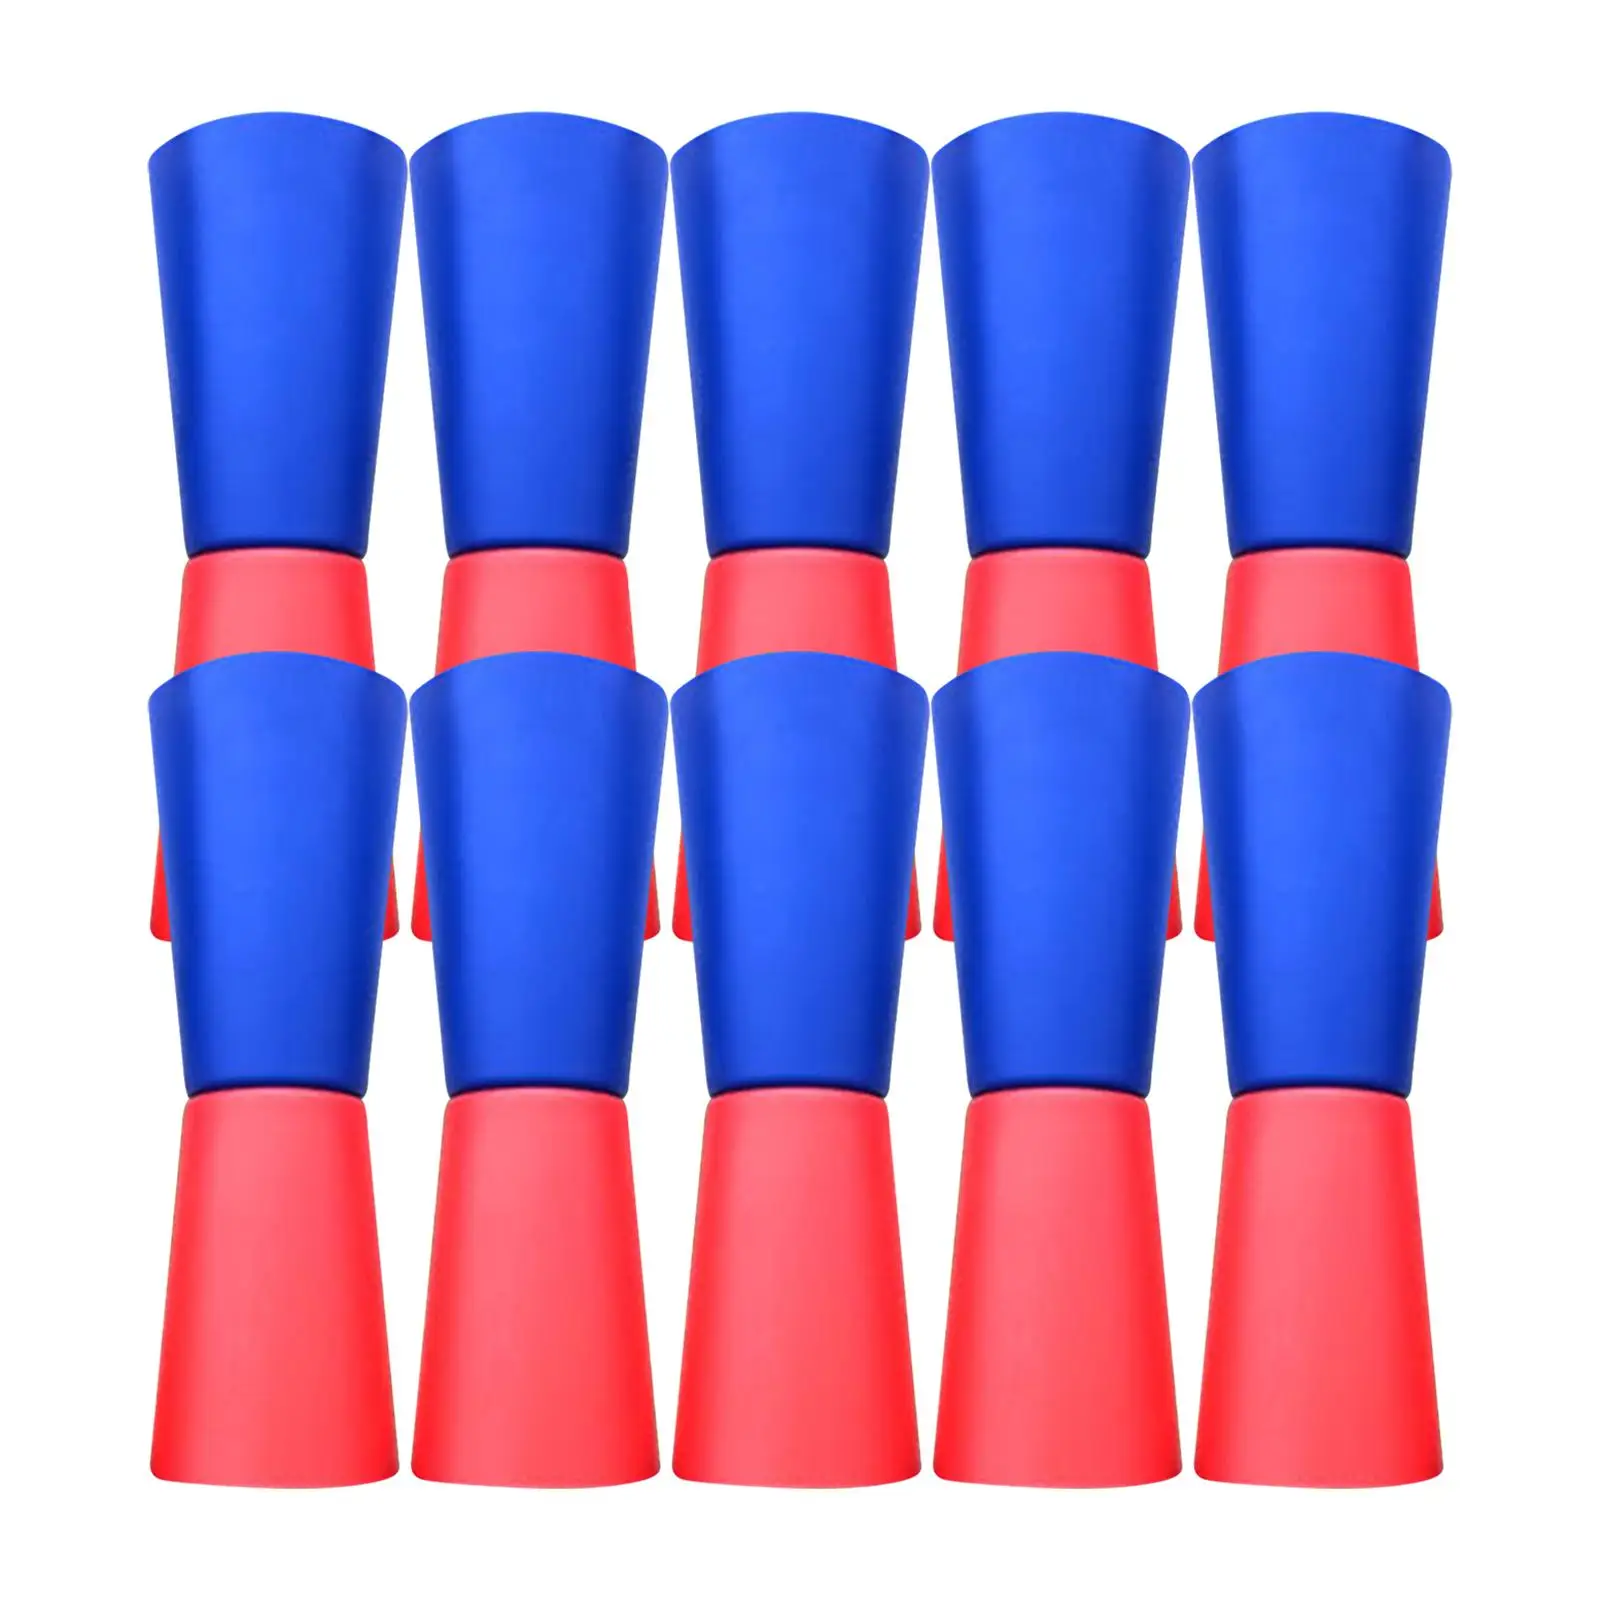 10Pcs Flip Cups Speed Agility Training Sport Equipment Reversed Cups for Football Kindergarten Basketball Gym with Storage Net